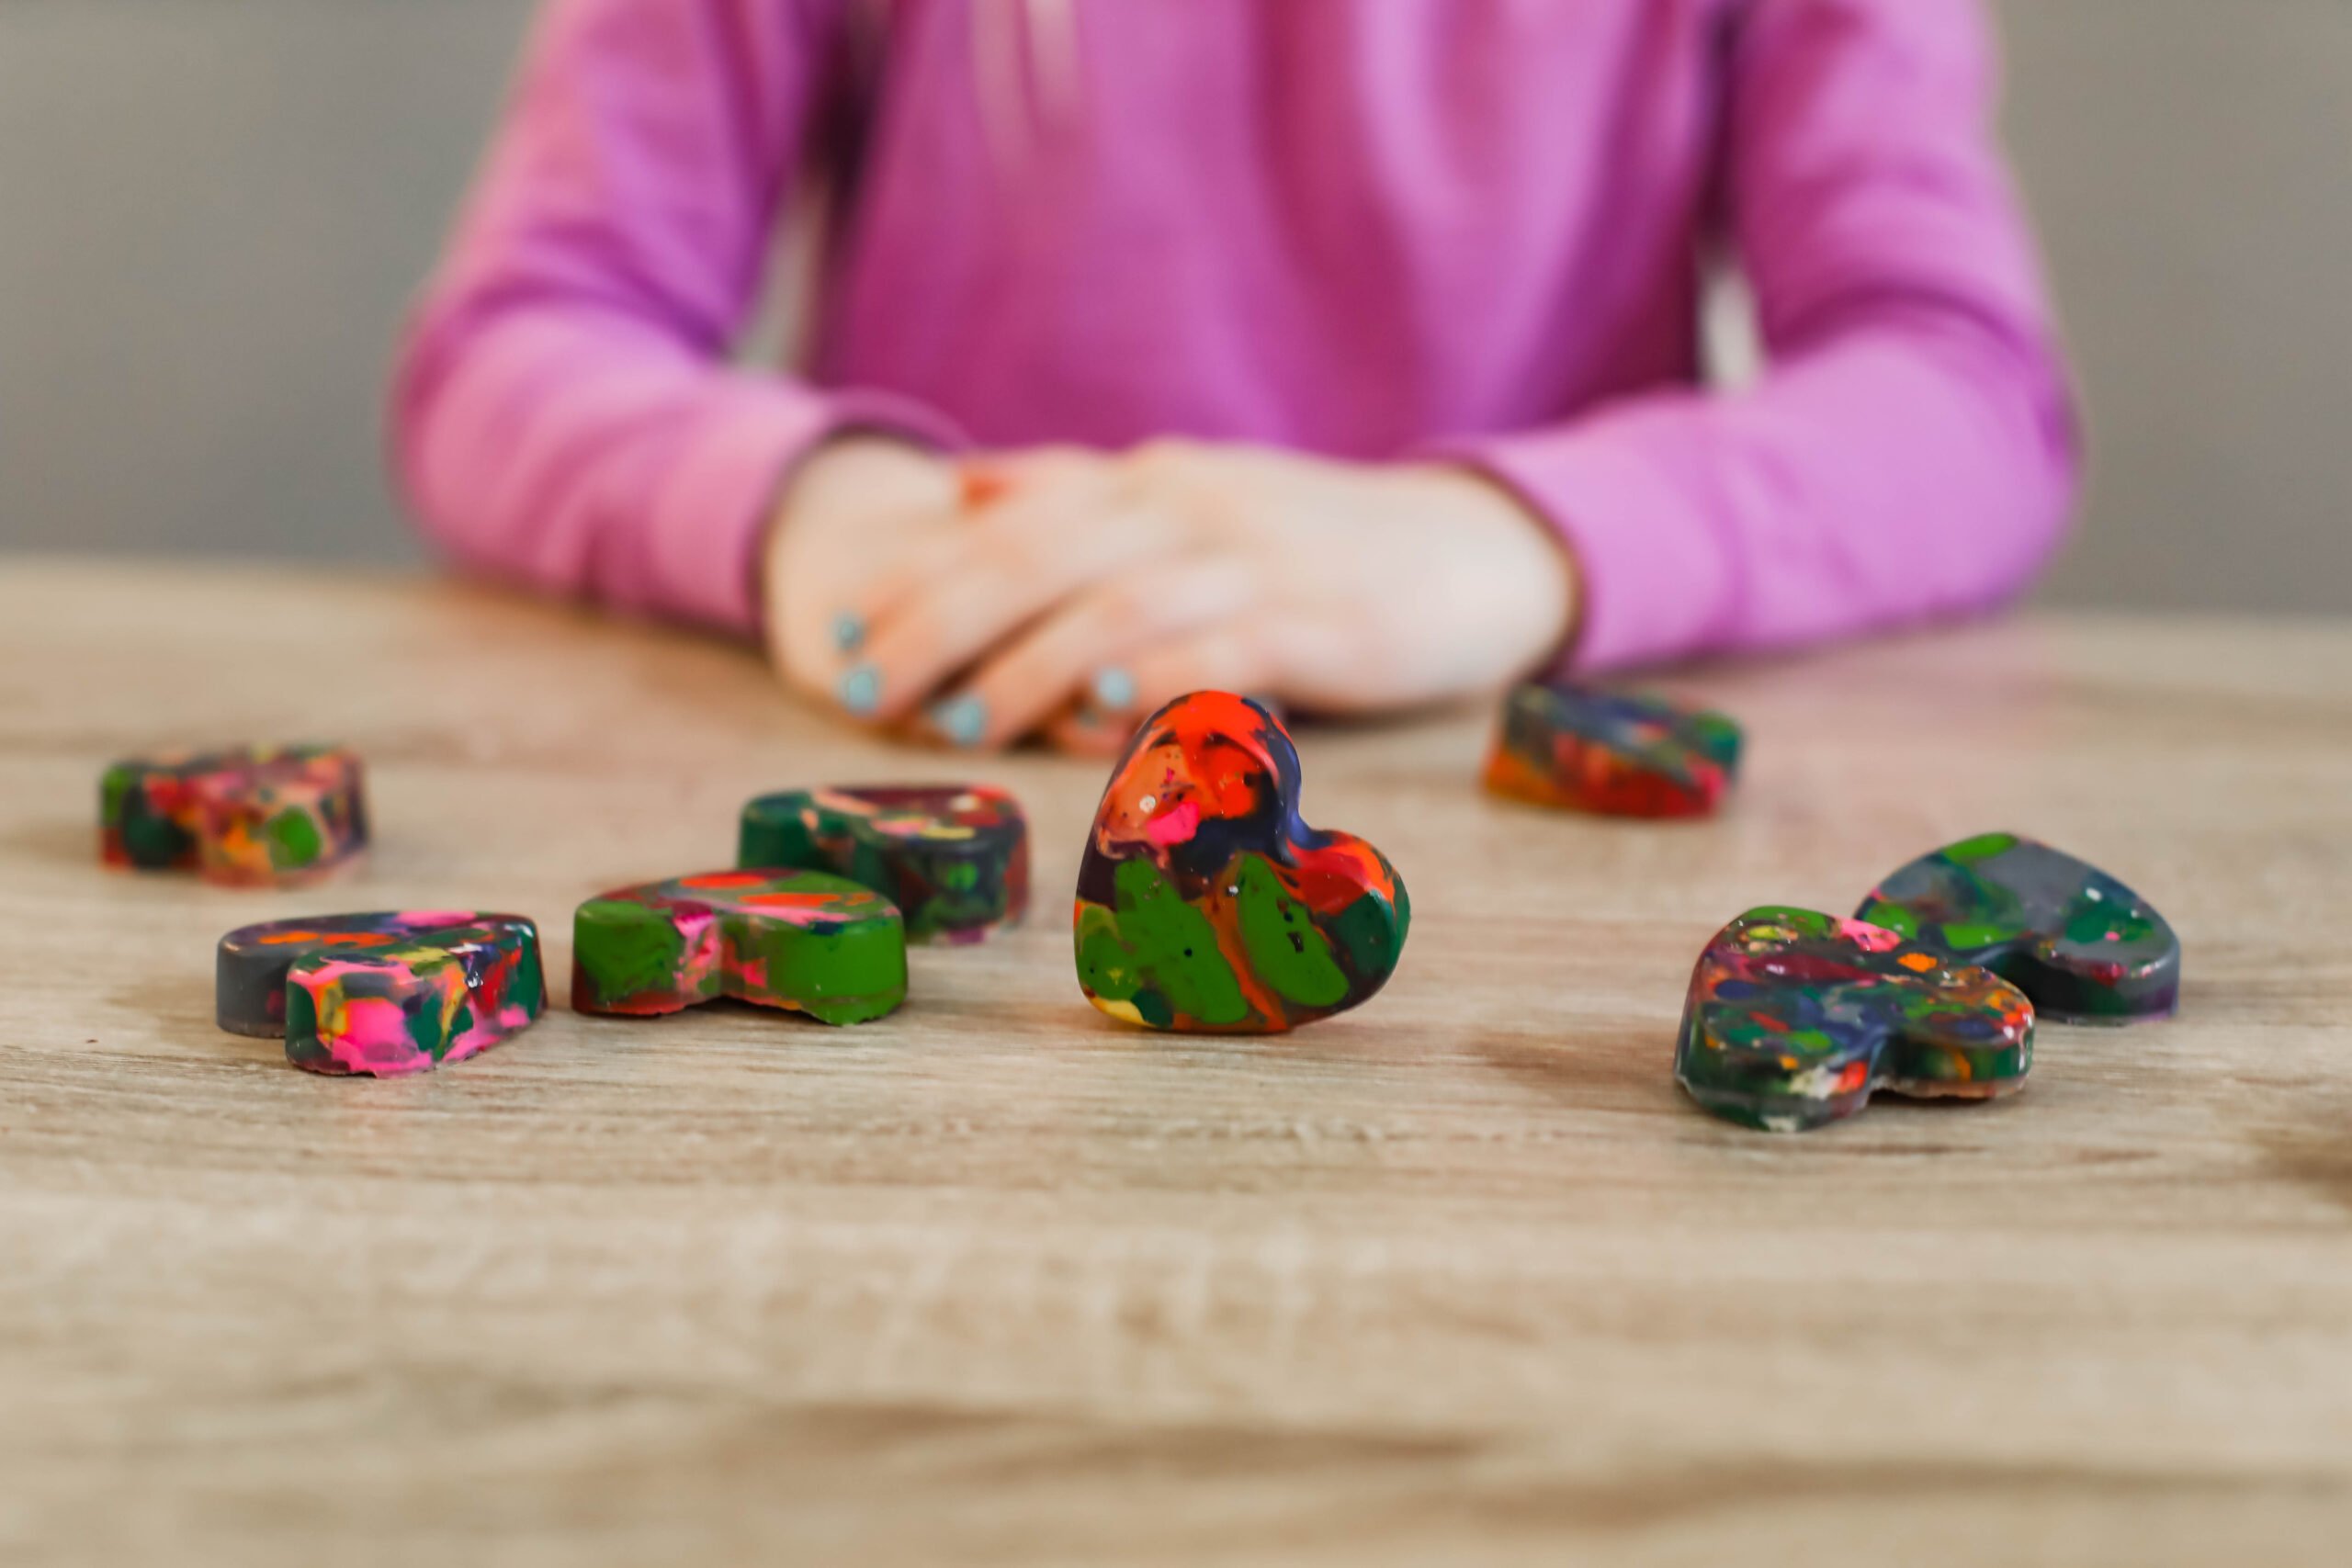 Looking for a fun and easy at home craft project? These DIY Rainbow Crayons were a ton of fun to make, and look ADORABLE!